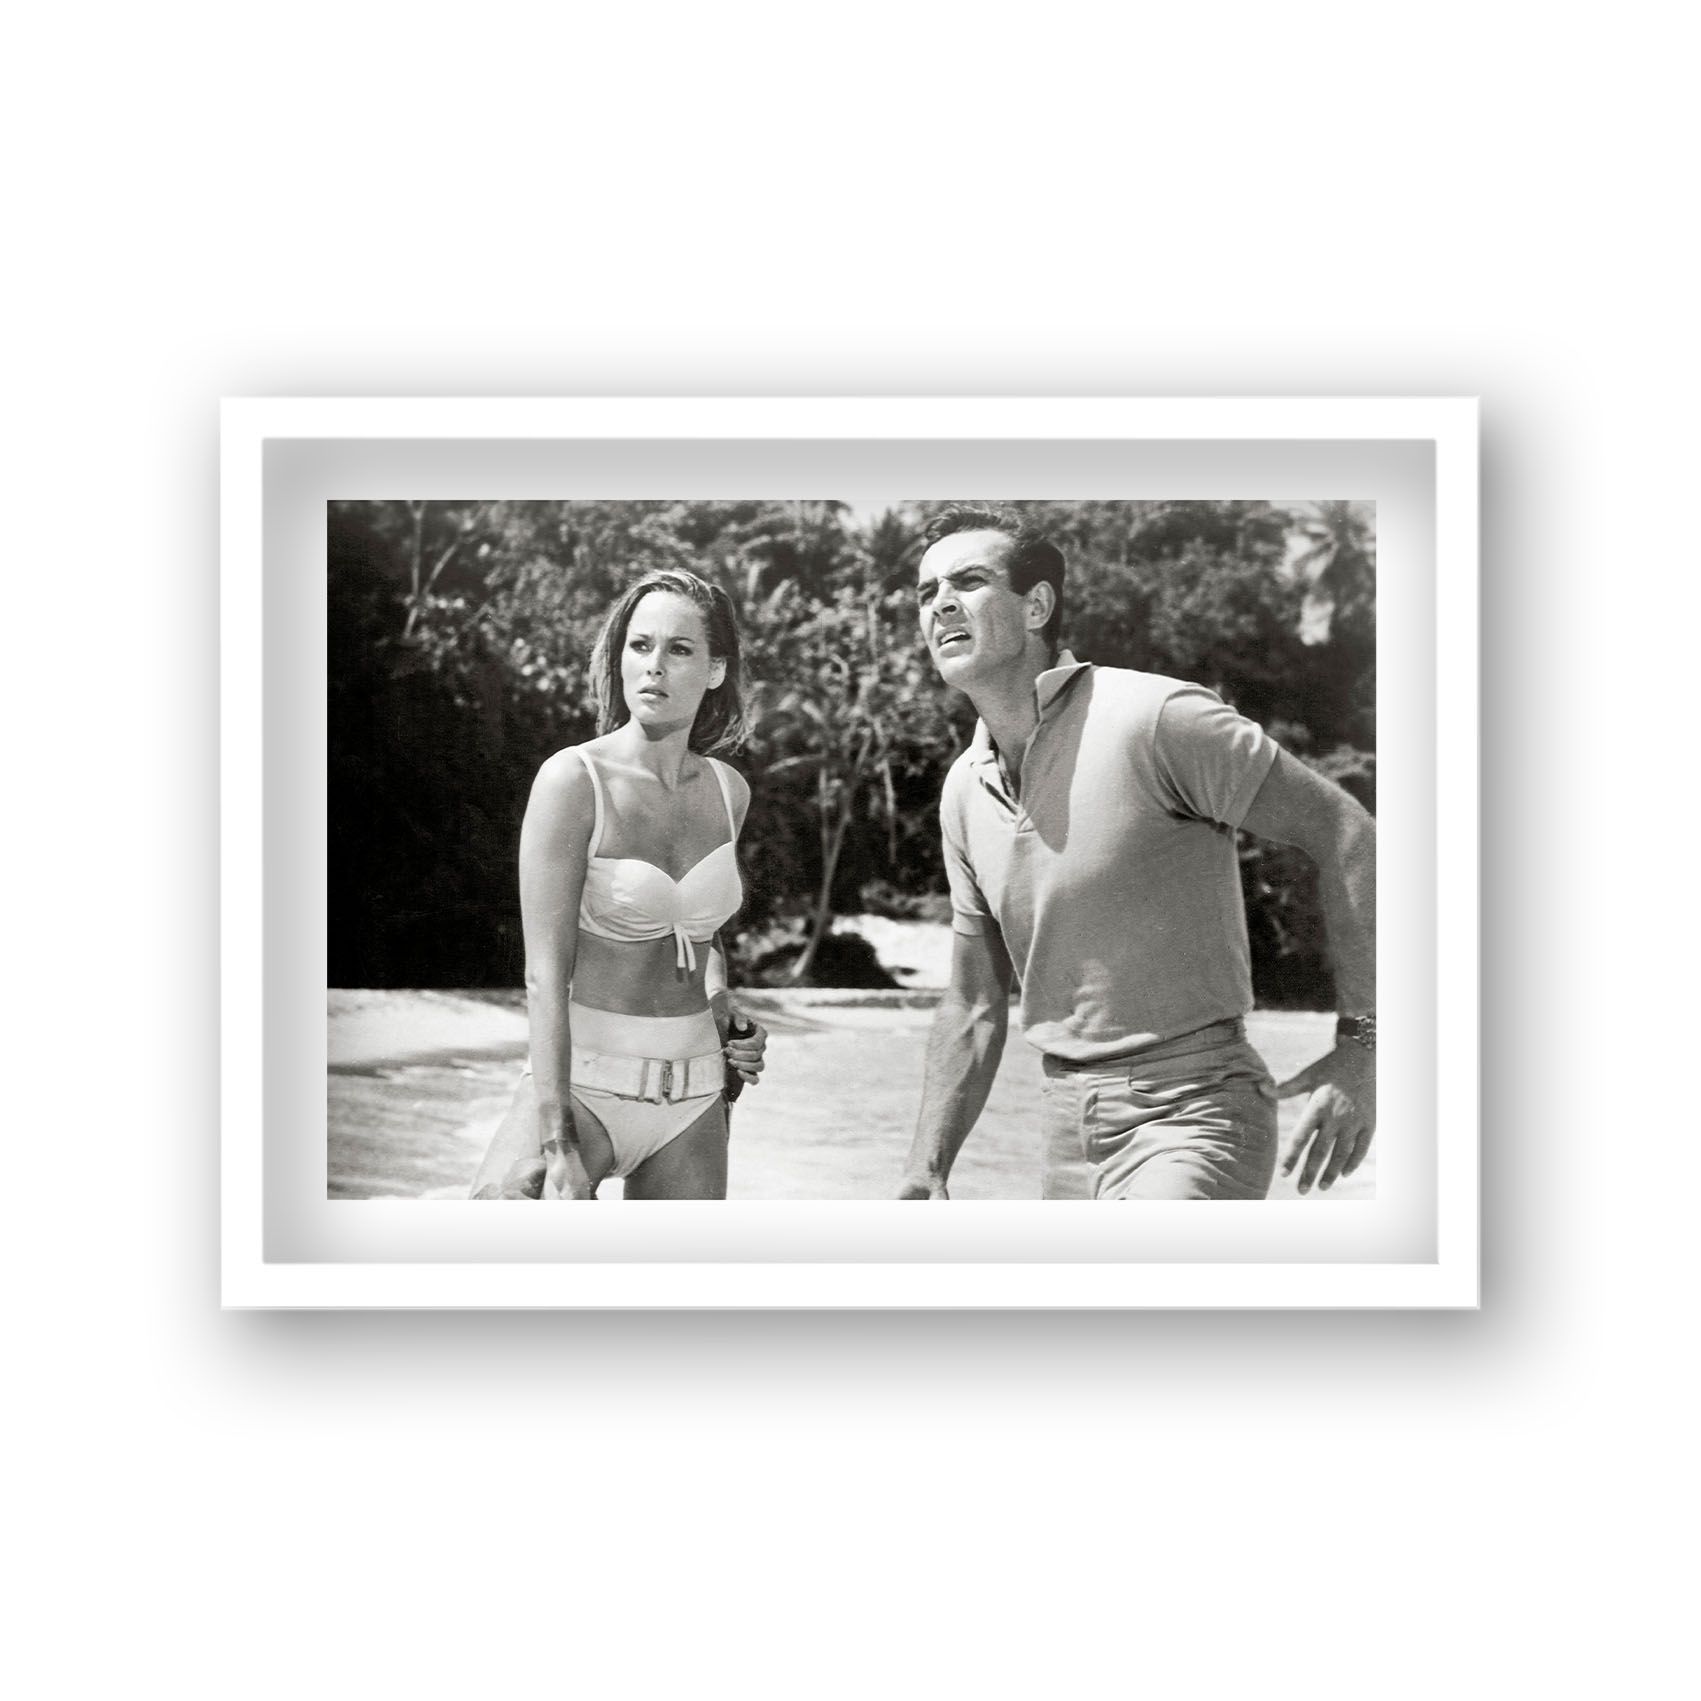 Sean Connery as James Bond with Ursula Andress as Honey Rider in Scene from Dr No